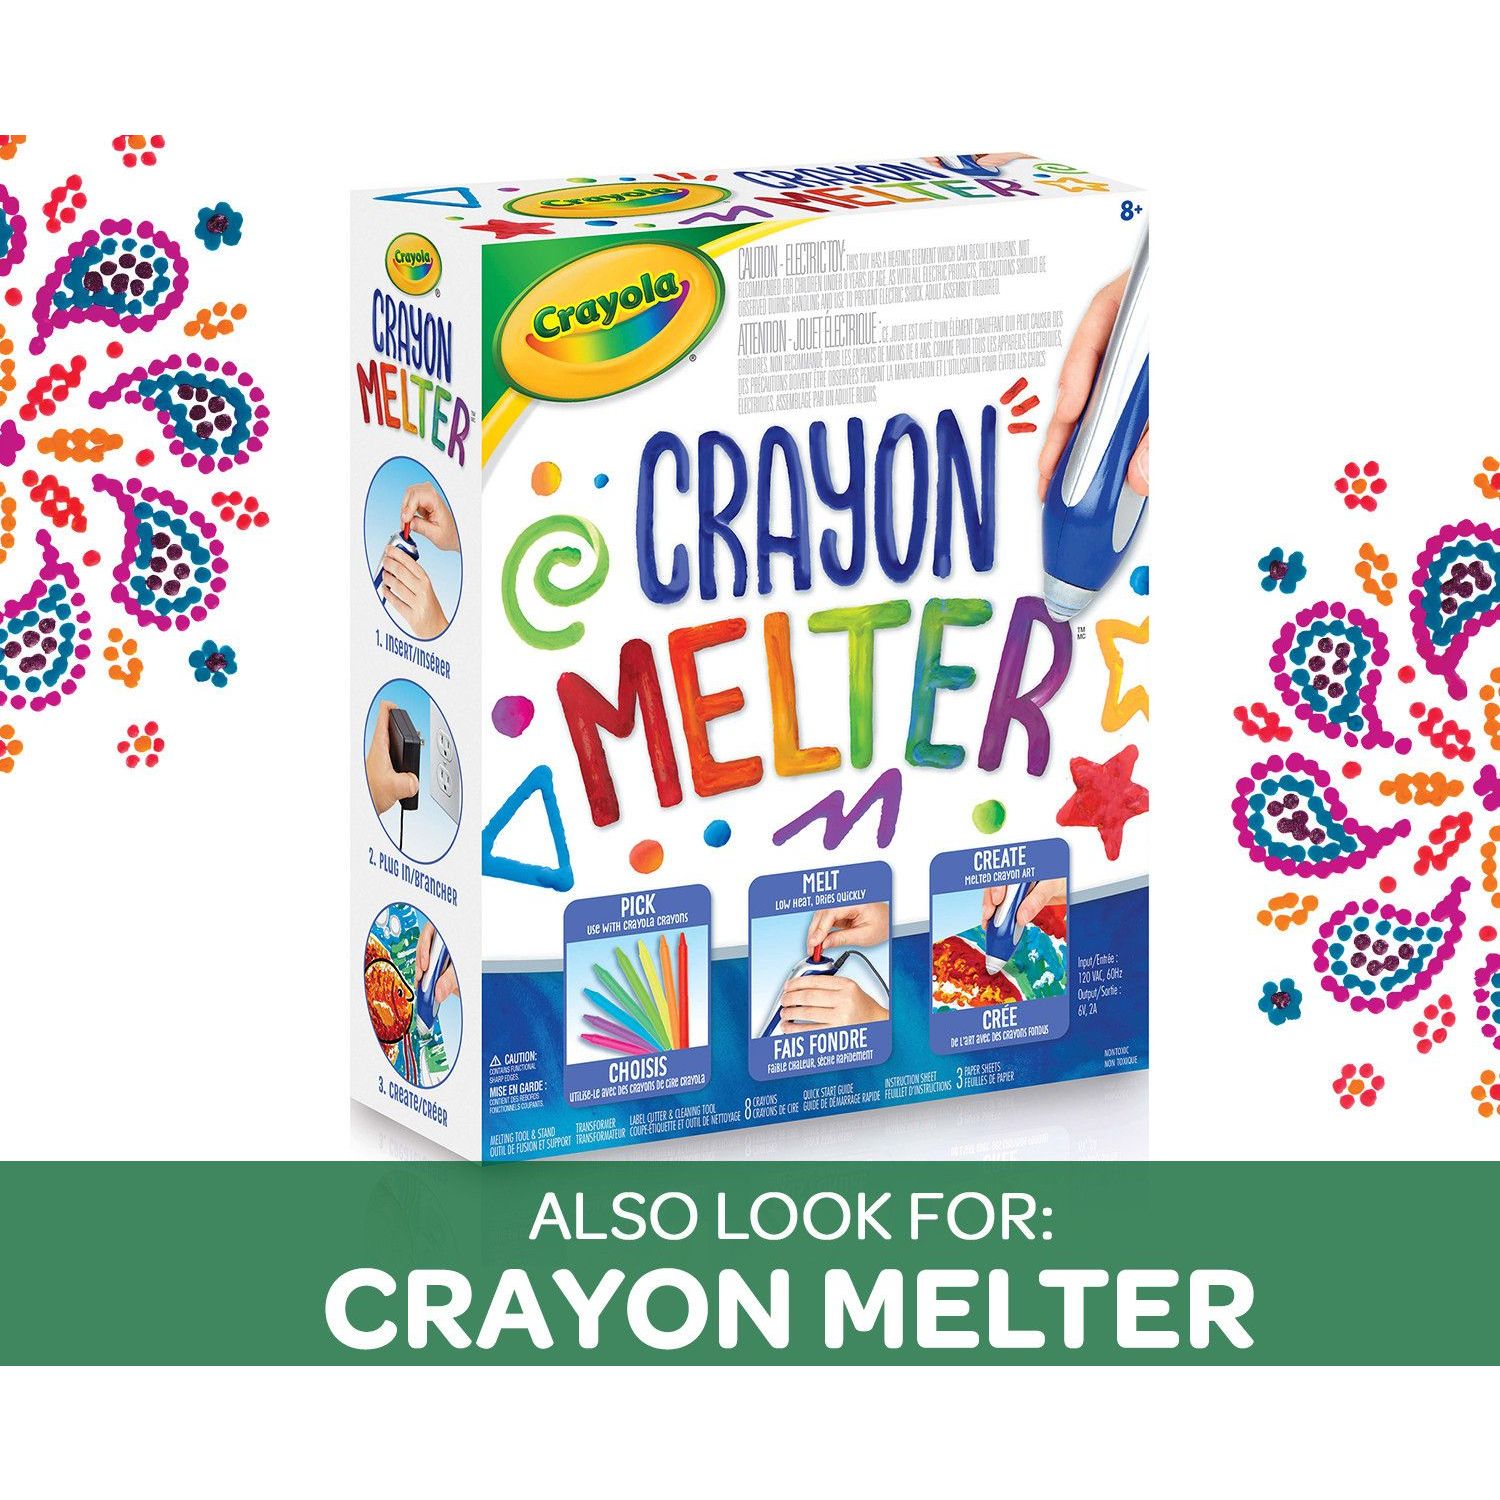 Crayola Crayon Melter Kit with Crayons, School Supplies, Gifts for Kids, Unisex Child - image 5 of 10